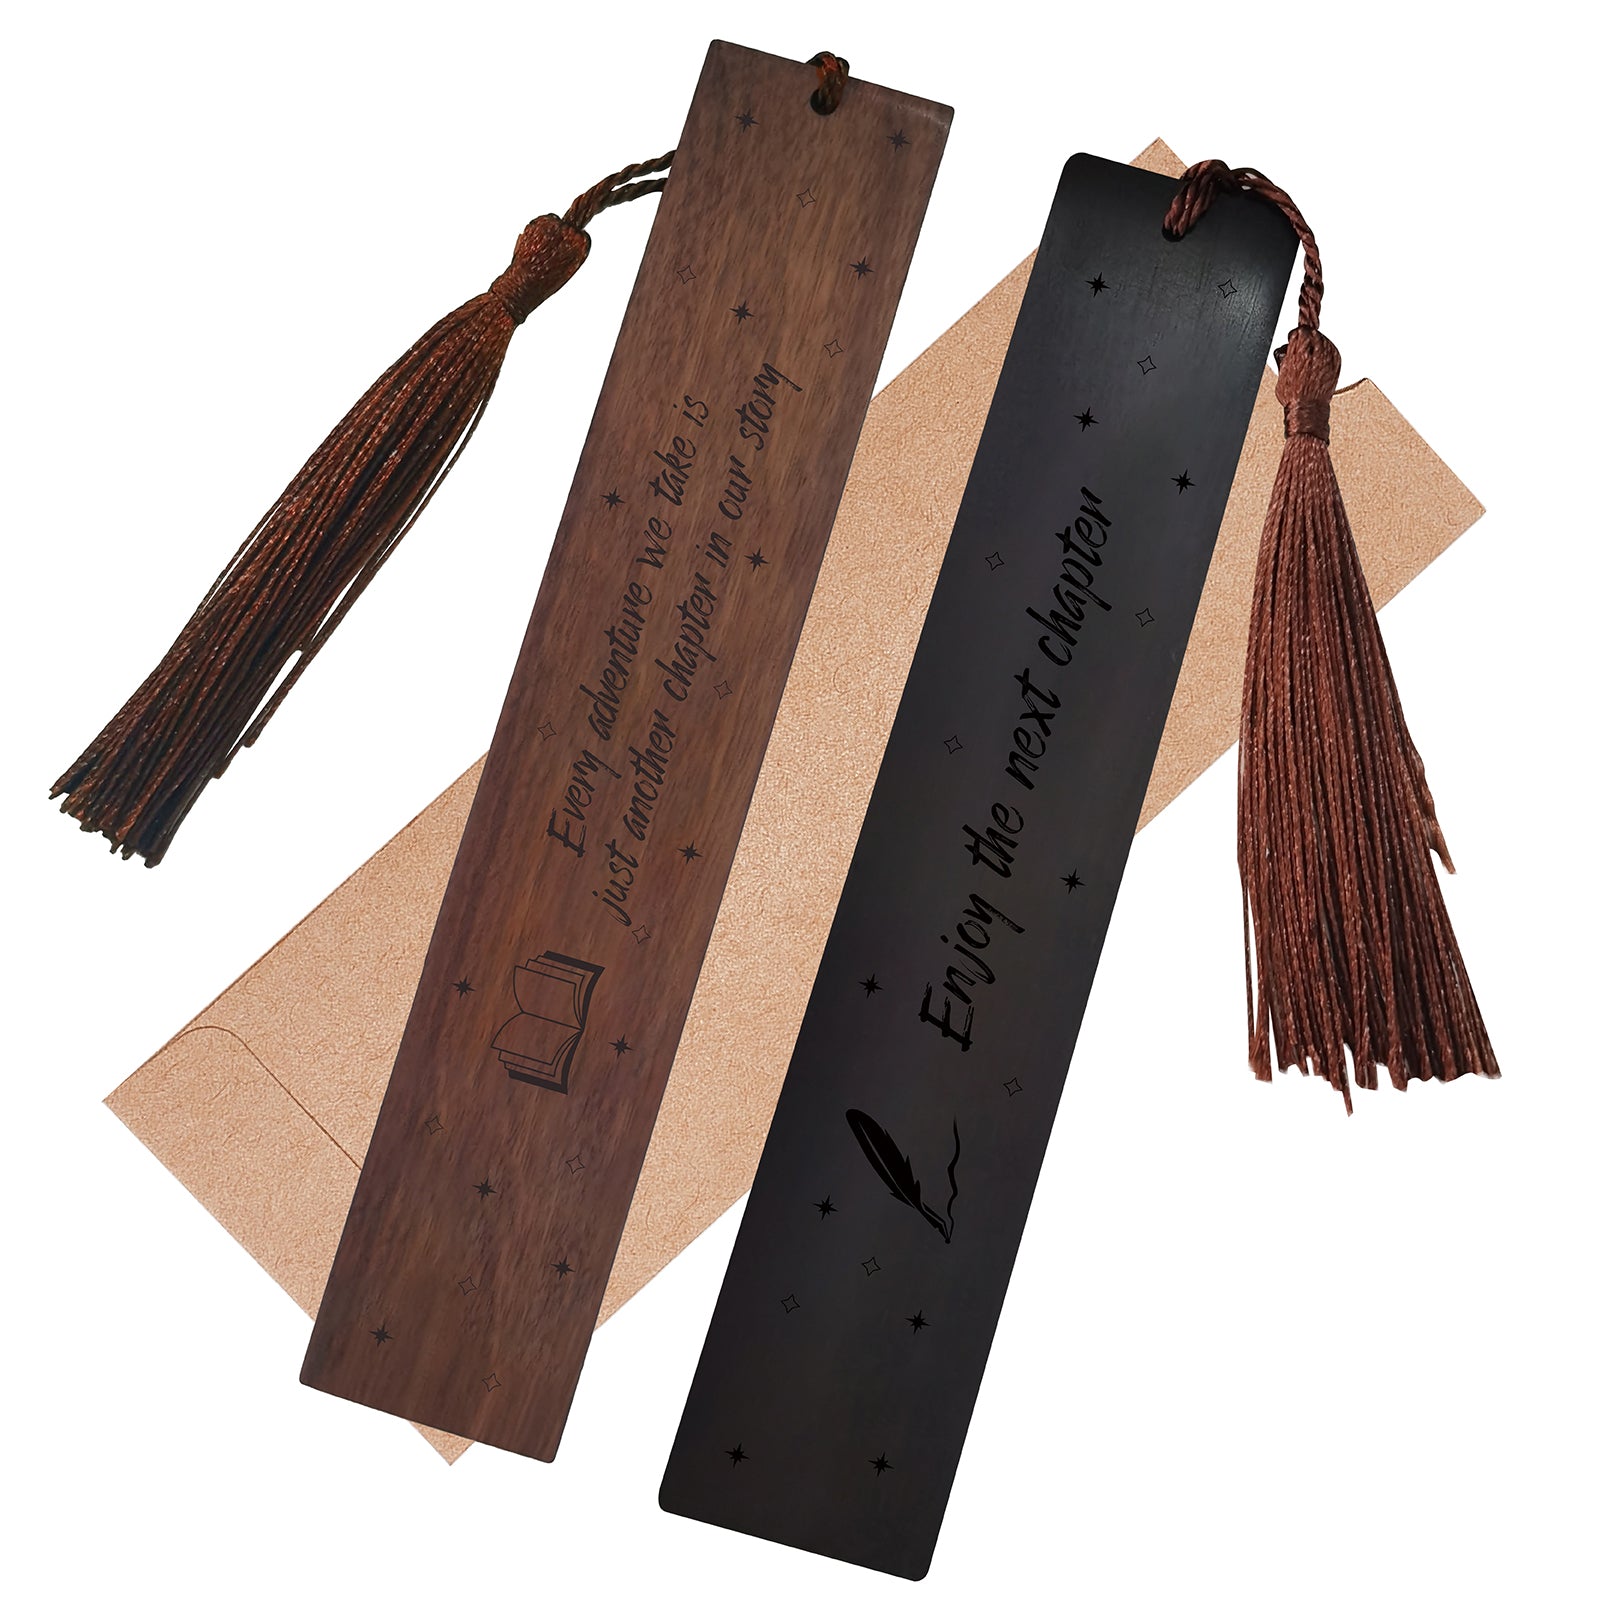 CRASPIRE 1 set Rosewood & African Blackwood Bookmarks Set, Laser Engraving, Rectangle with Word Every adventure we take is just another chapter in our story & Enjoy the next chapter, Study Supplies Pattern, 148x25mm, 2pcs/set